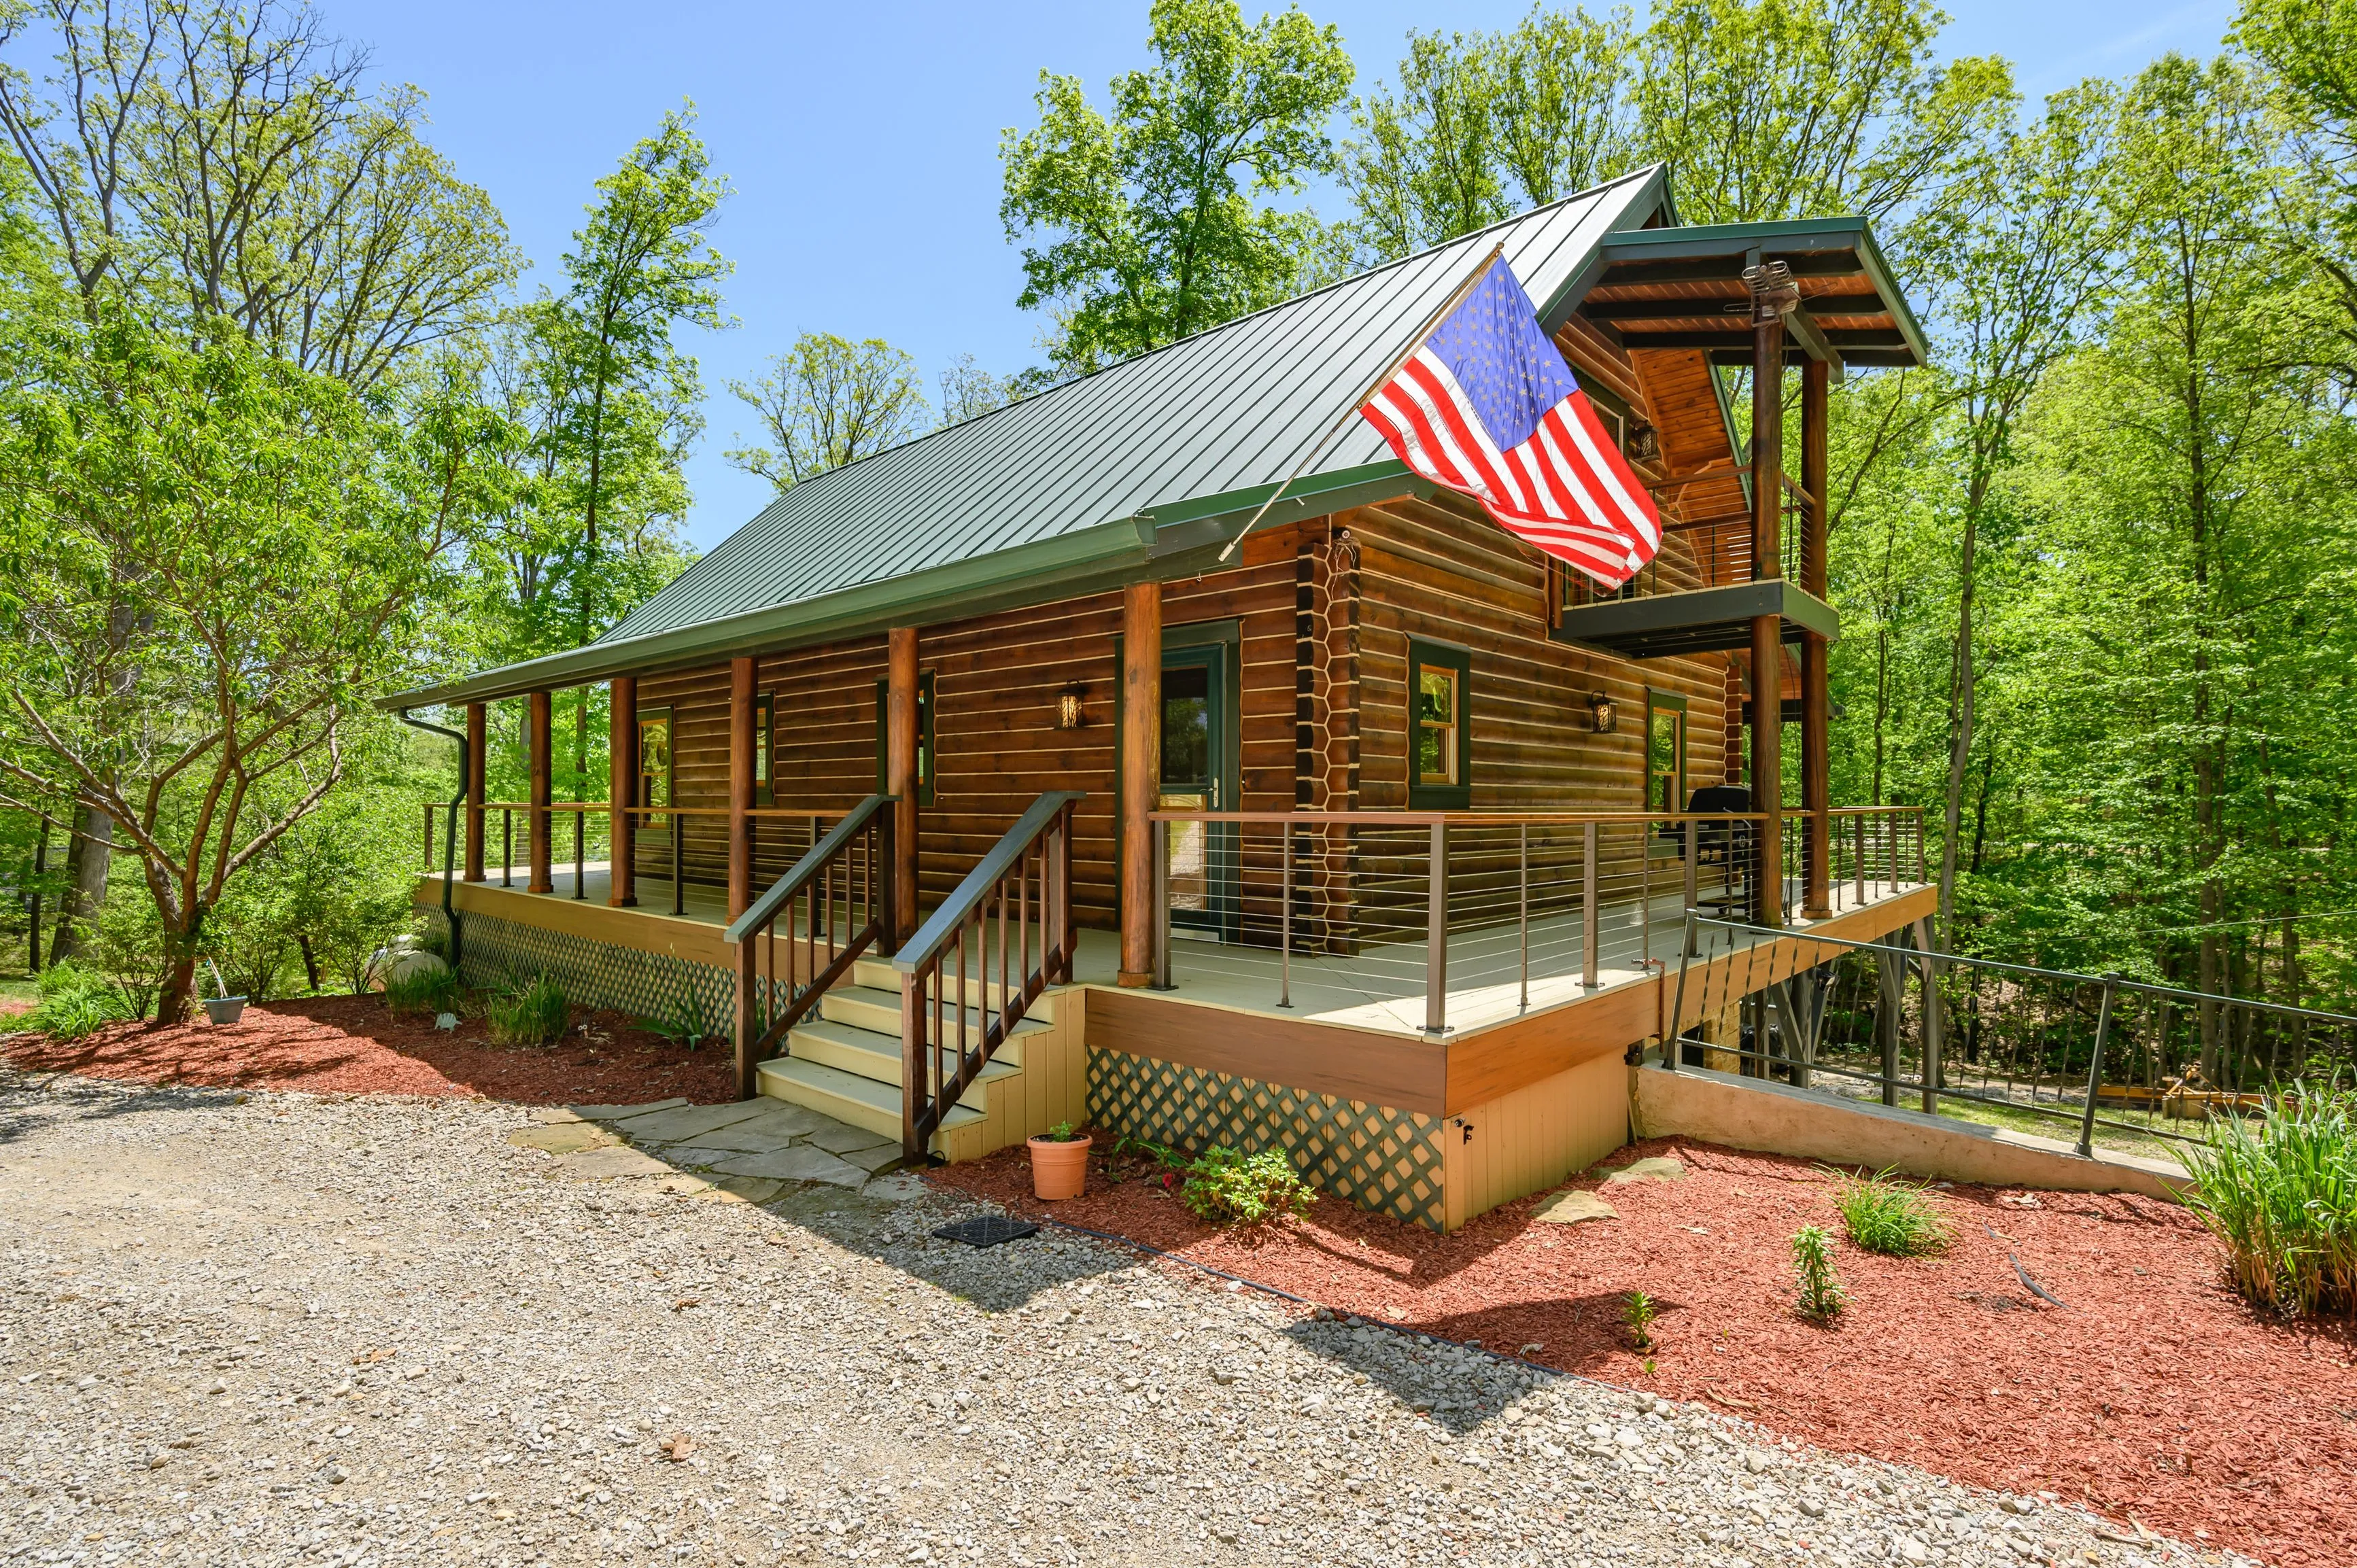 Wooden log cabin with an American flag flying, surrounded by trees under a clear blue sky.